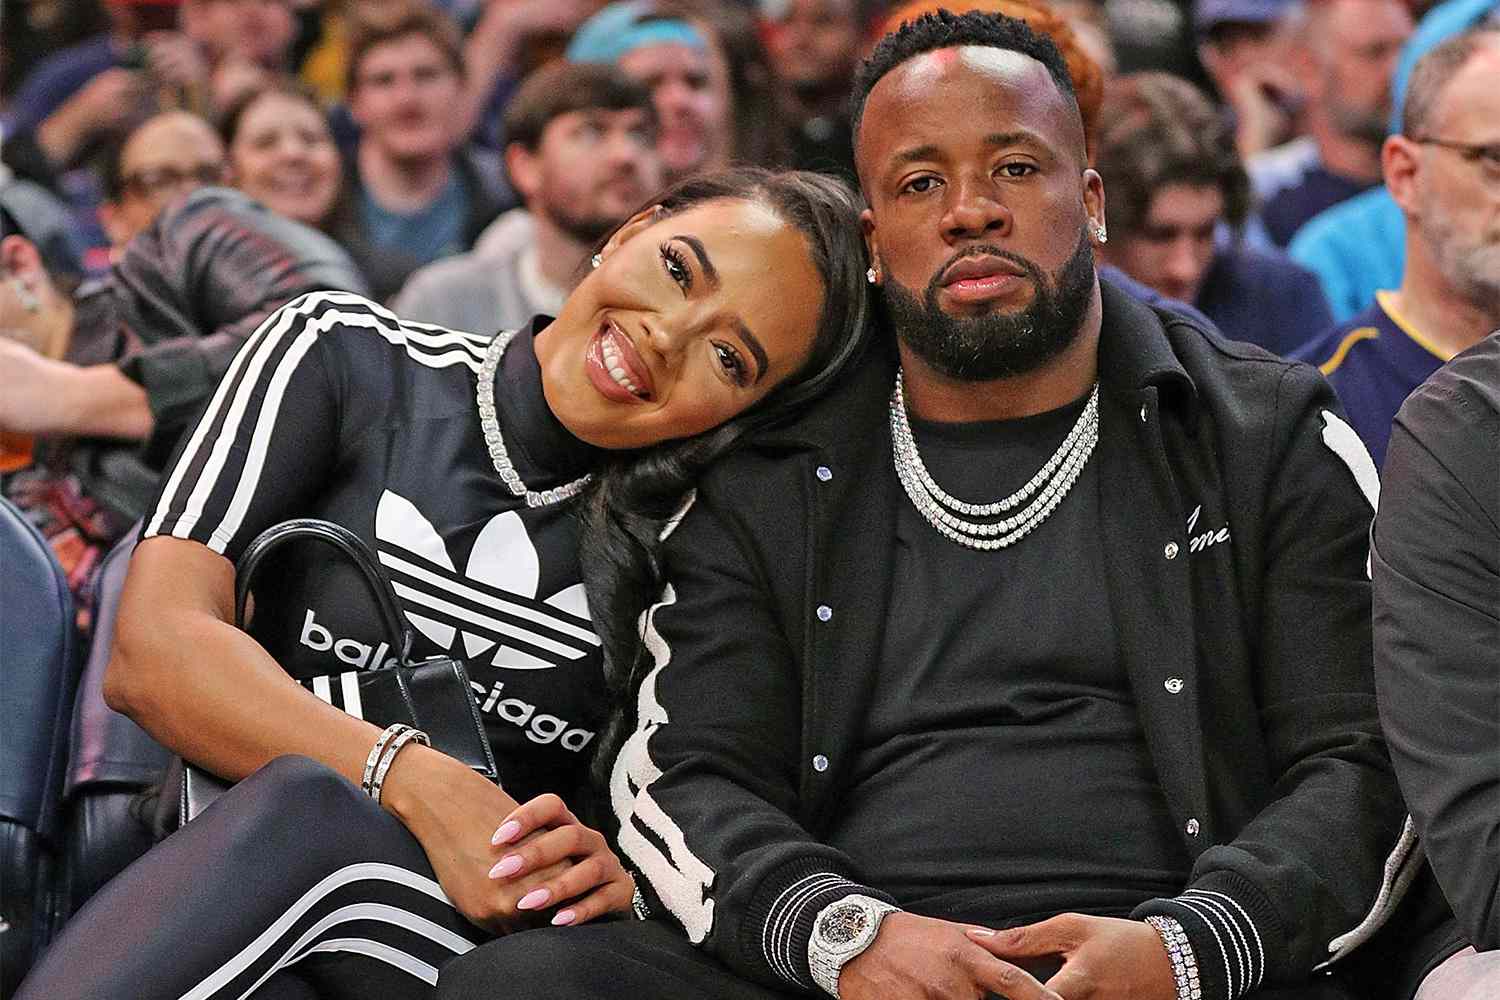 Khalil Mack girlfriend: Who is Angela Simmons? Is she dating NFL